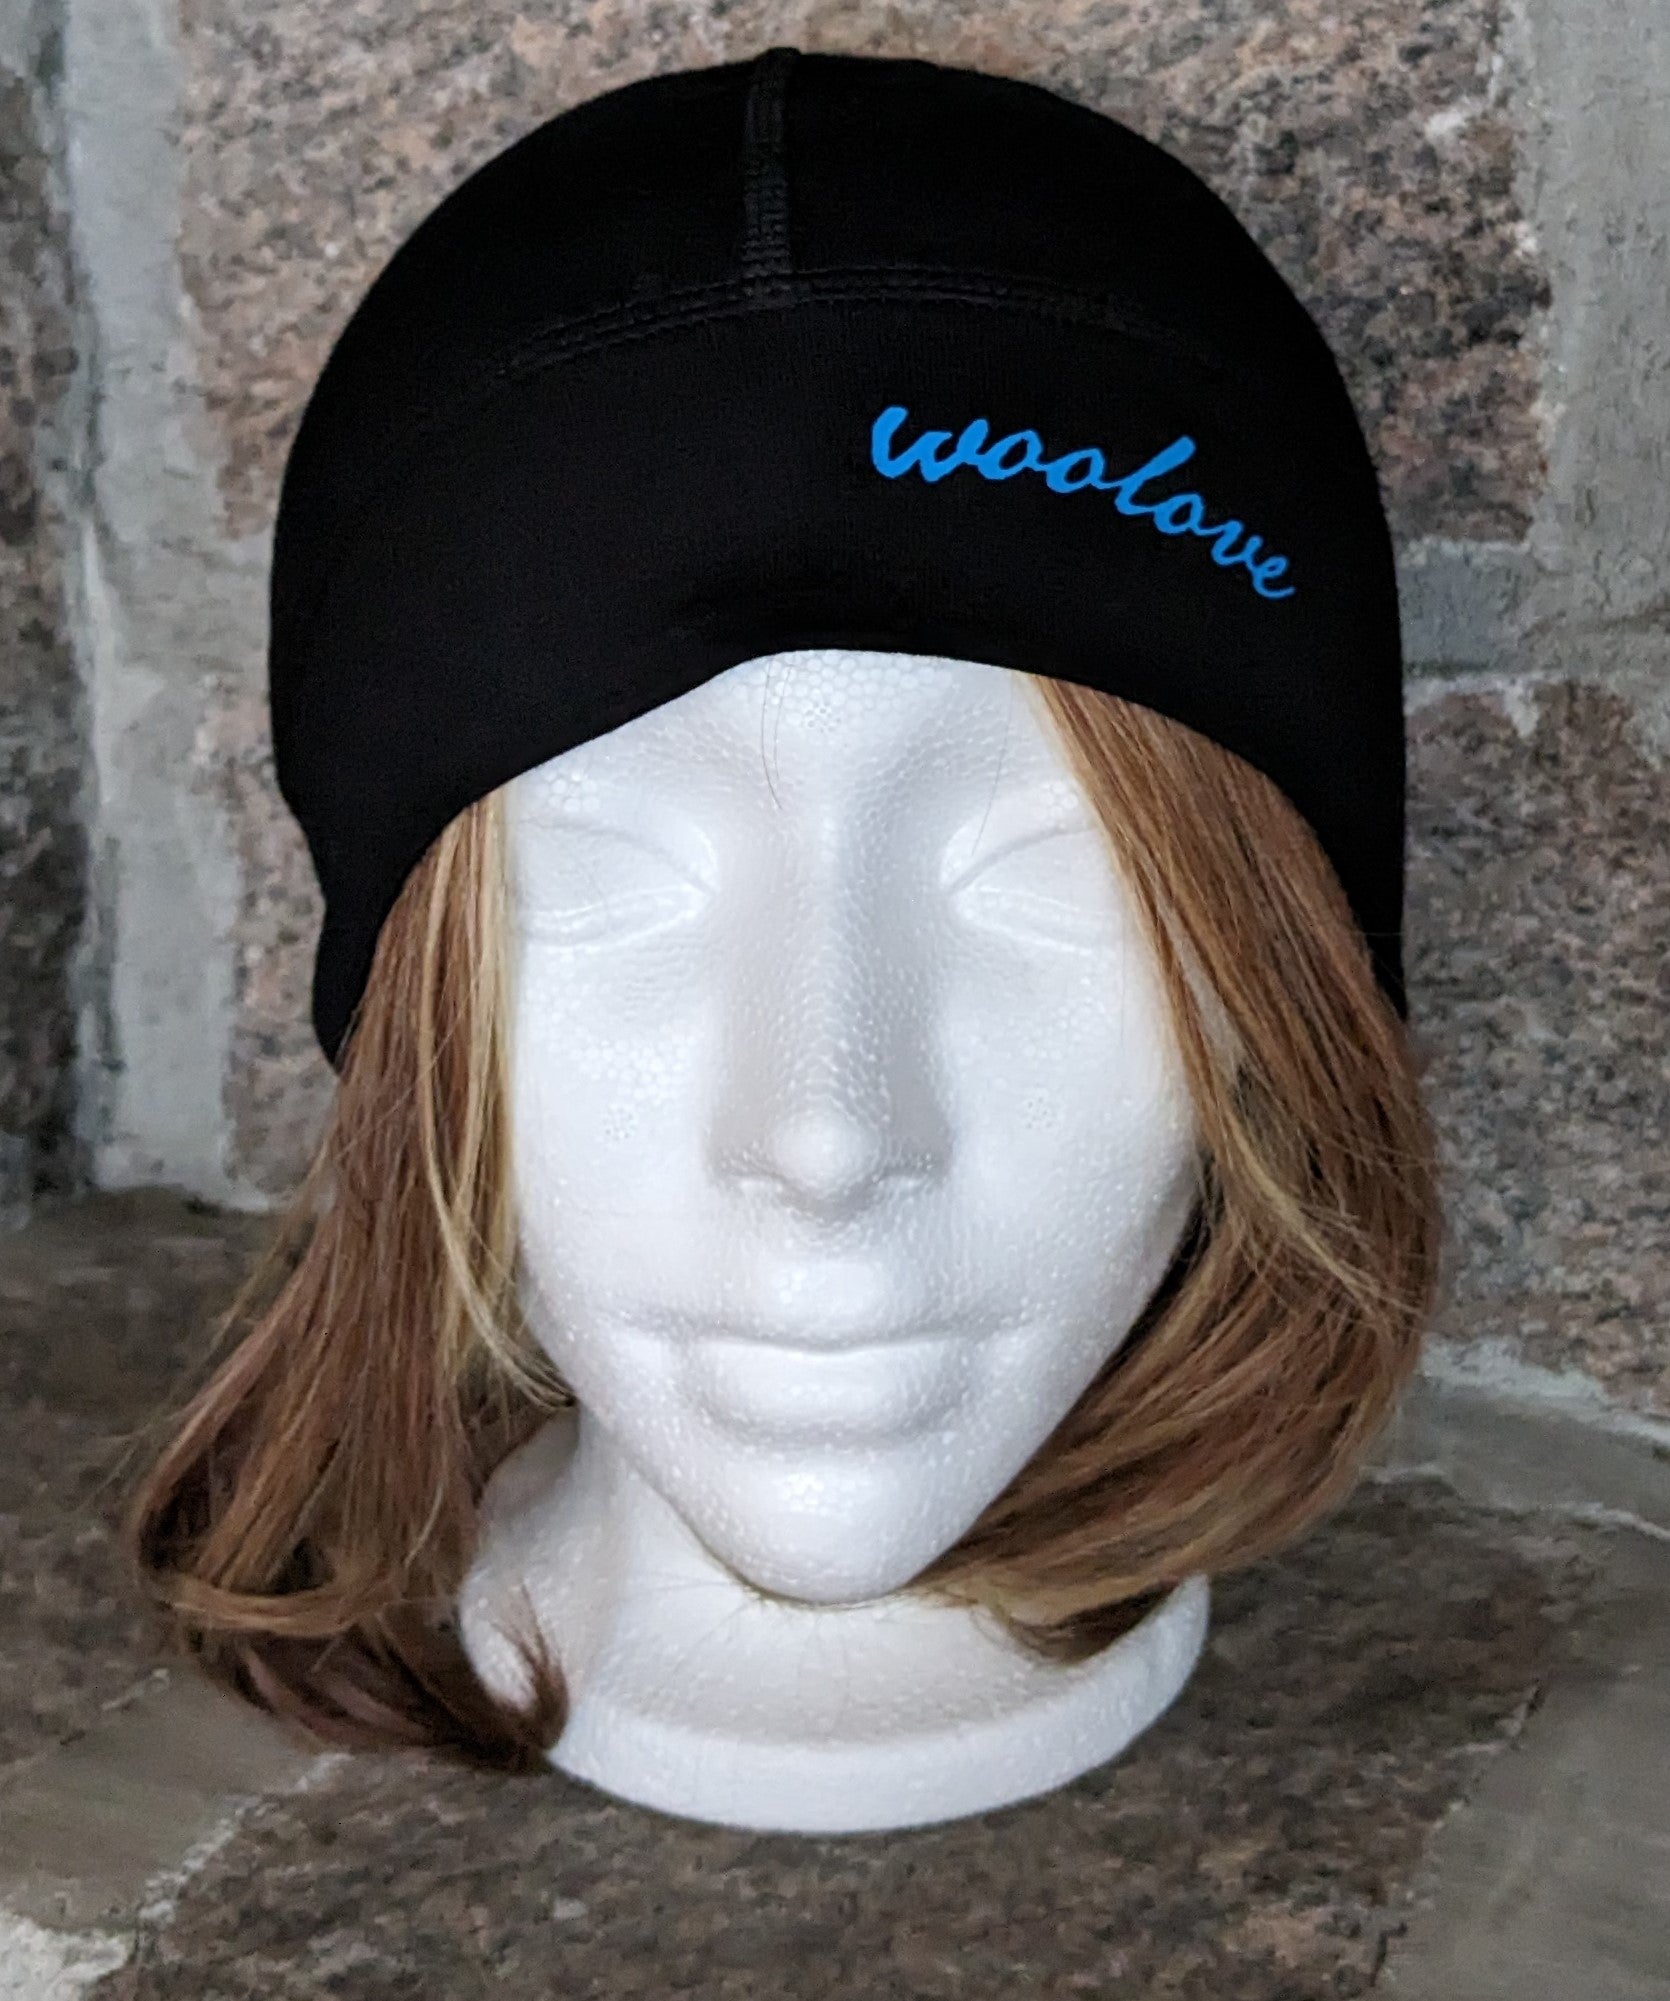 Hat Beanie Merino Wool by Wool Love great under a cycling helmet for warmth and moisture wicking it is black  with blue 'woolove' text logo